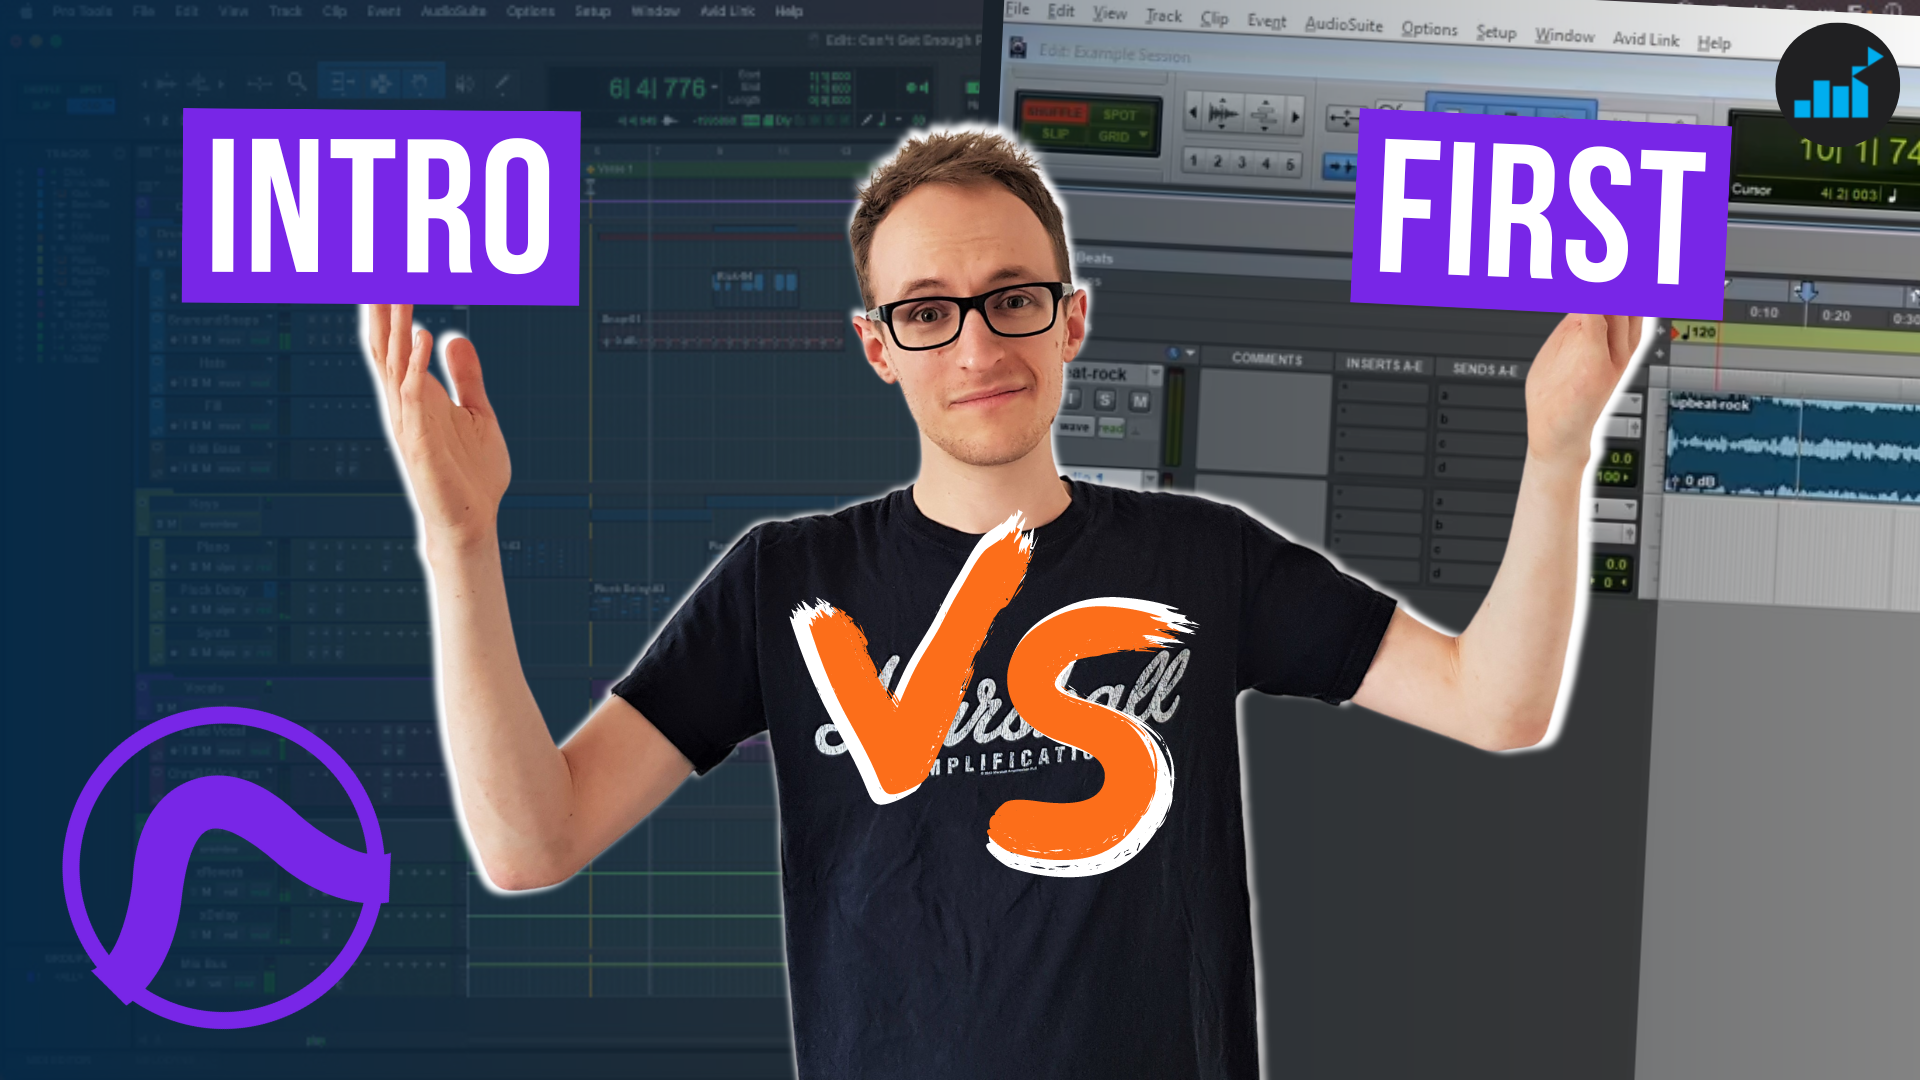 Recording And Editing A Podcast With Pro Tools Intro